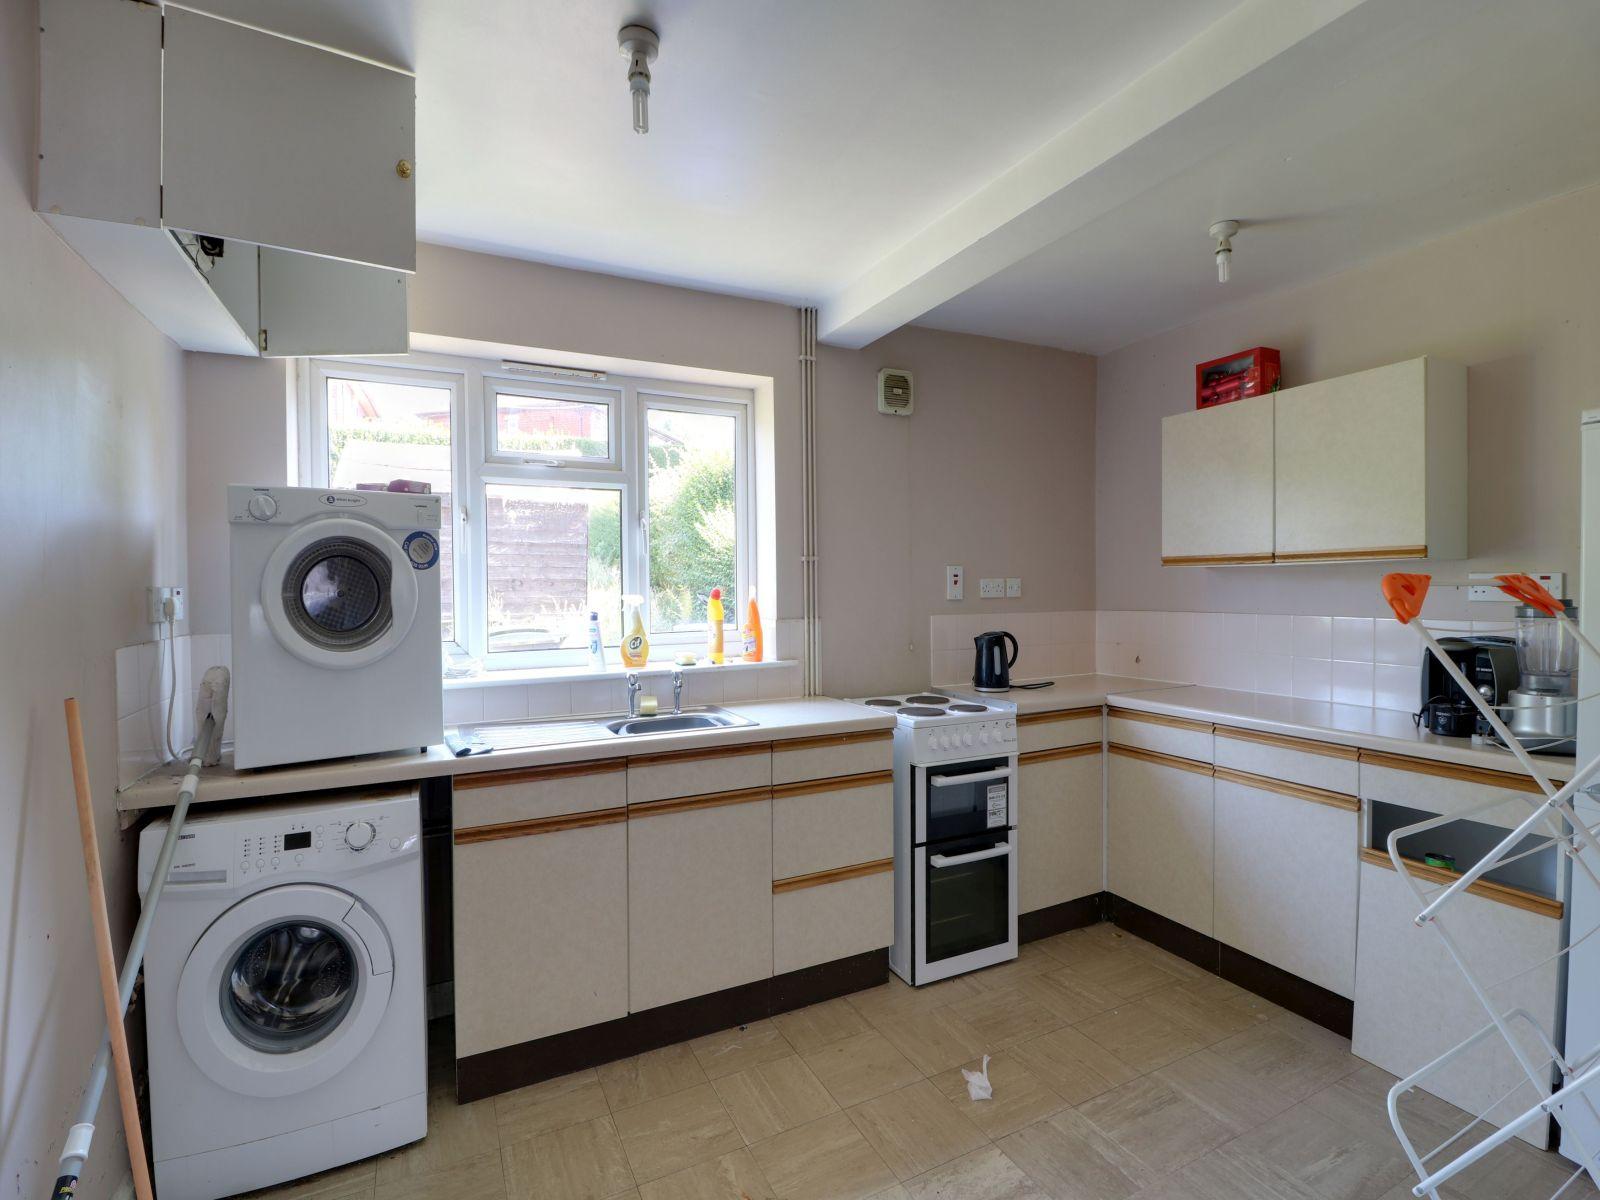 Thornley Road, Stanfields, Stoke-on-Trent, Staffordshire, ST6 7AN